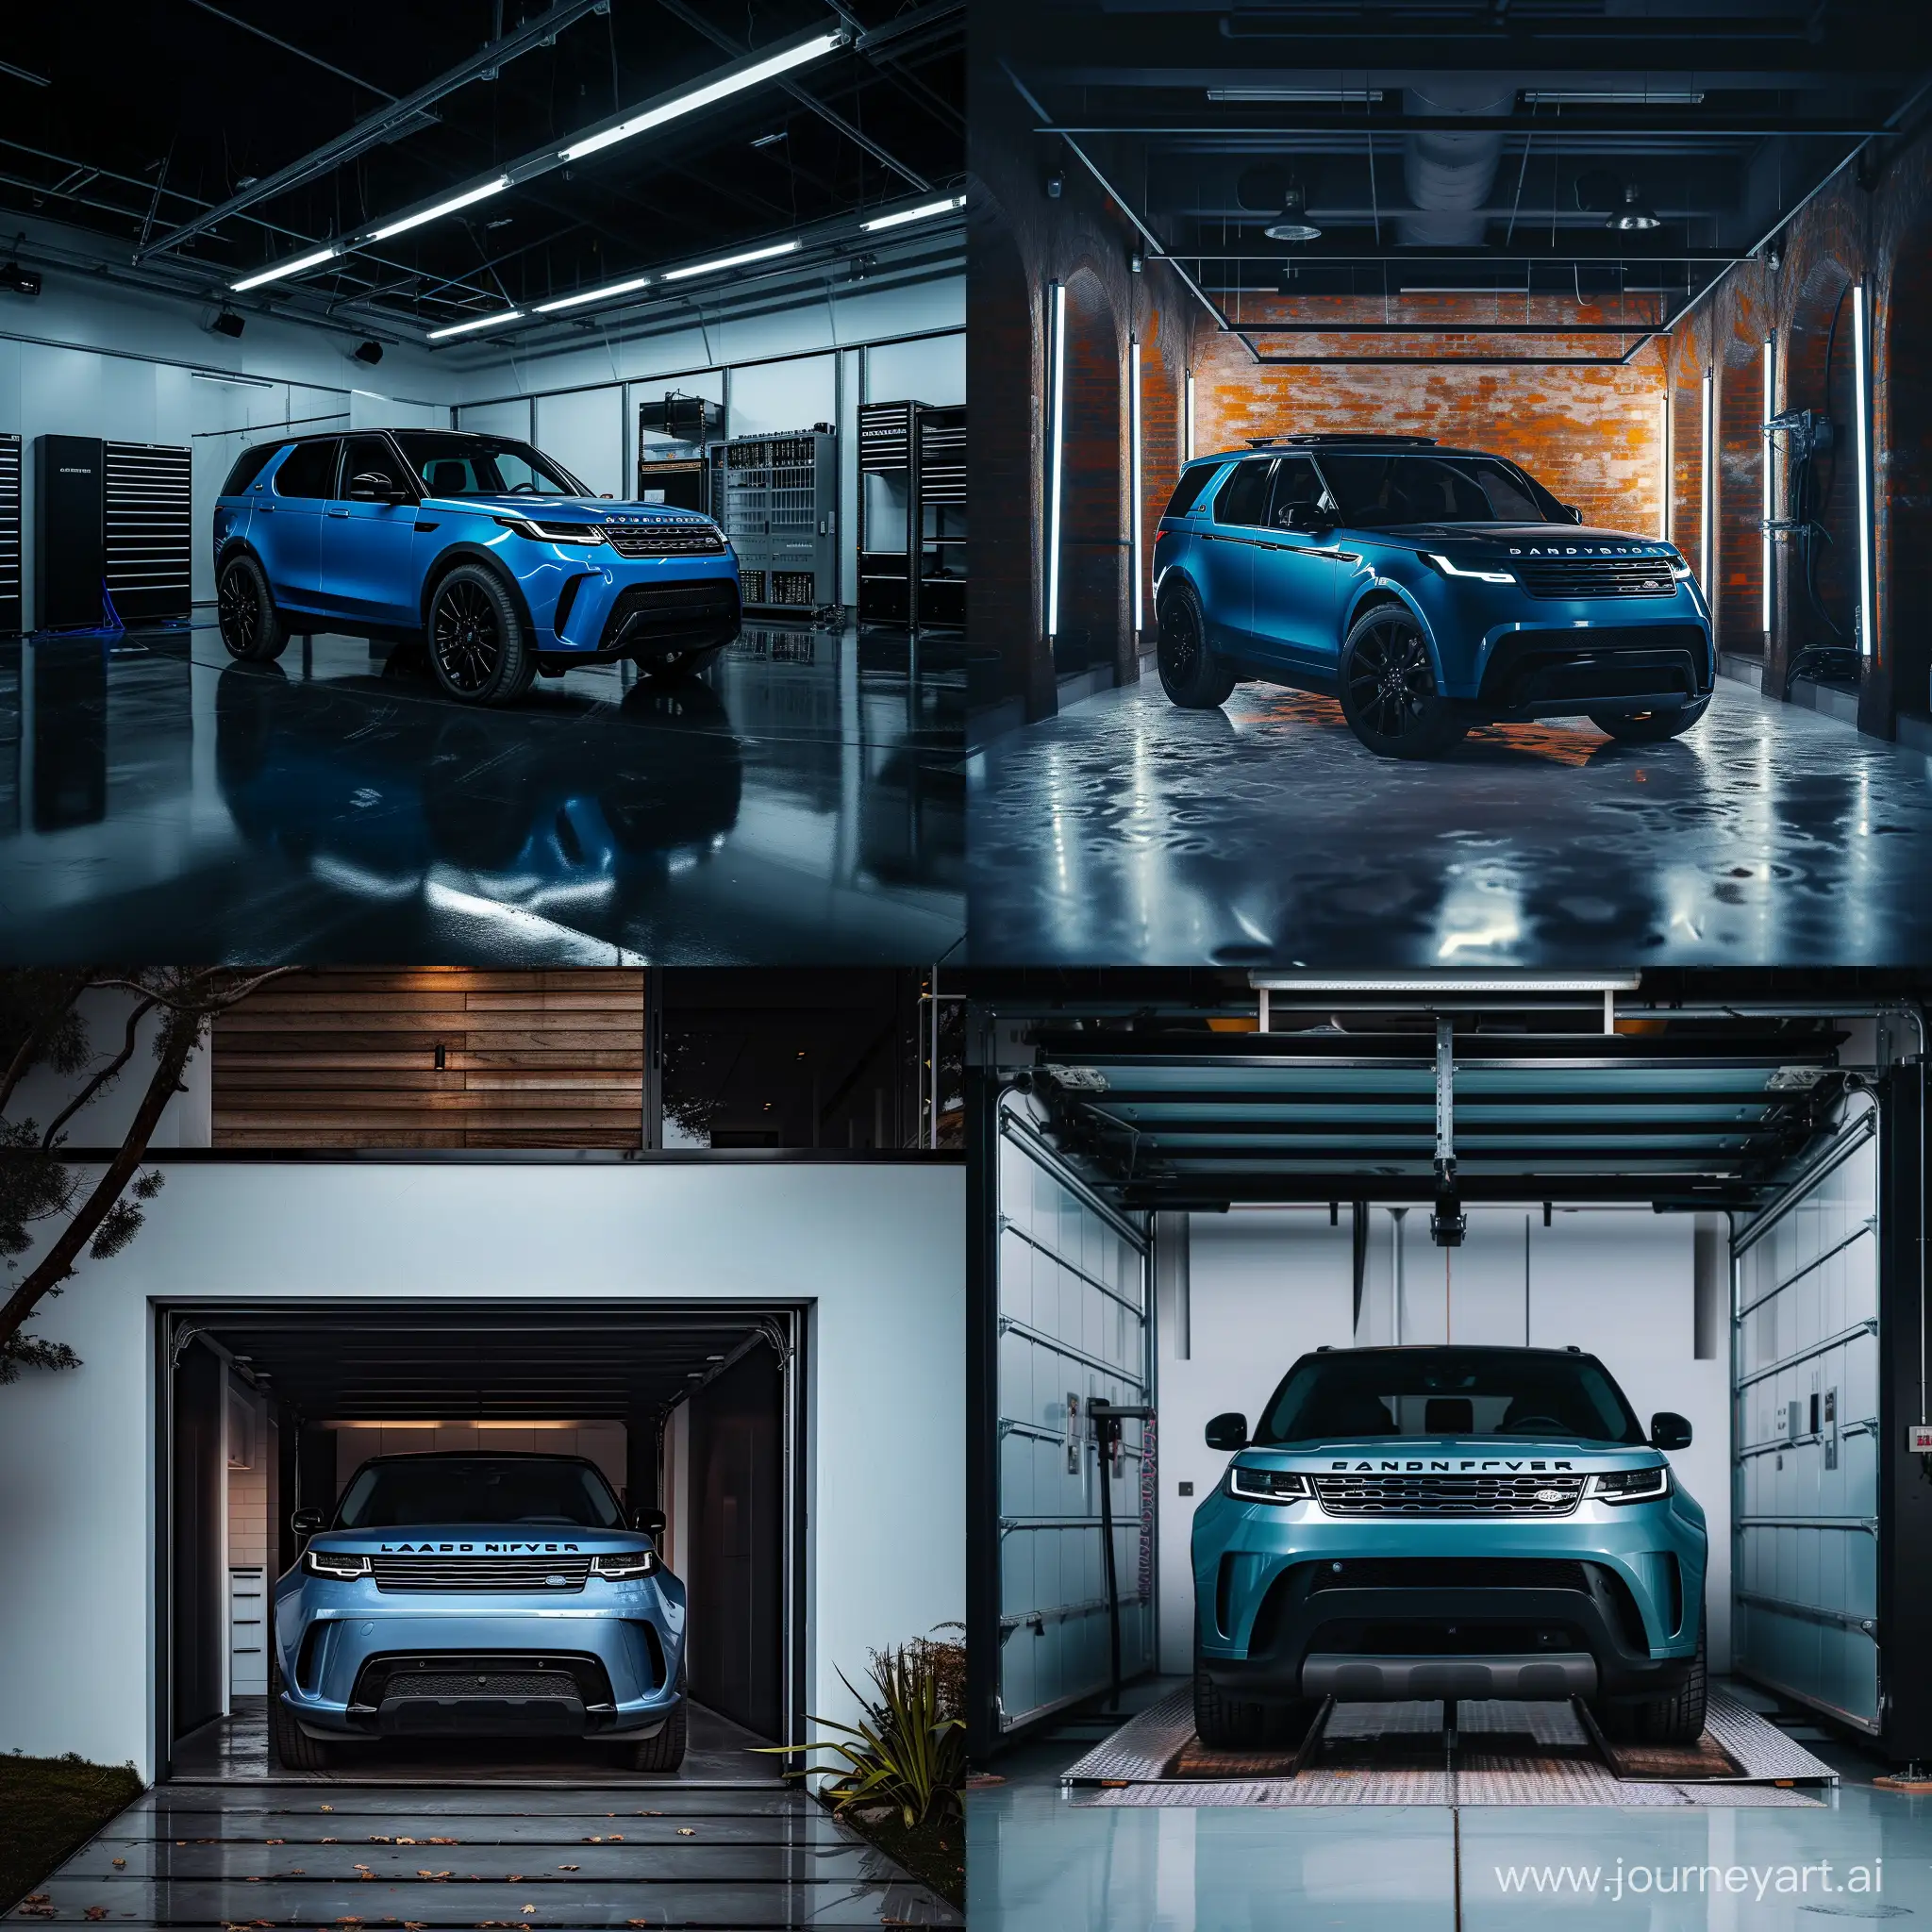 Luxurious-Blue-Landrover-Discovery-2023-Captured-in-HighPrecision-Garage-Setting